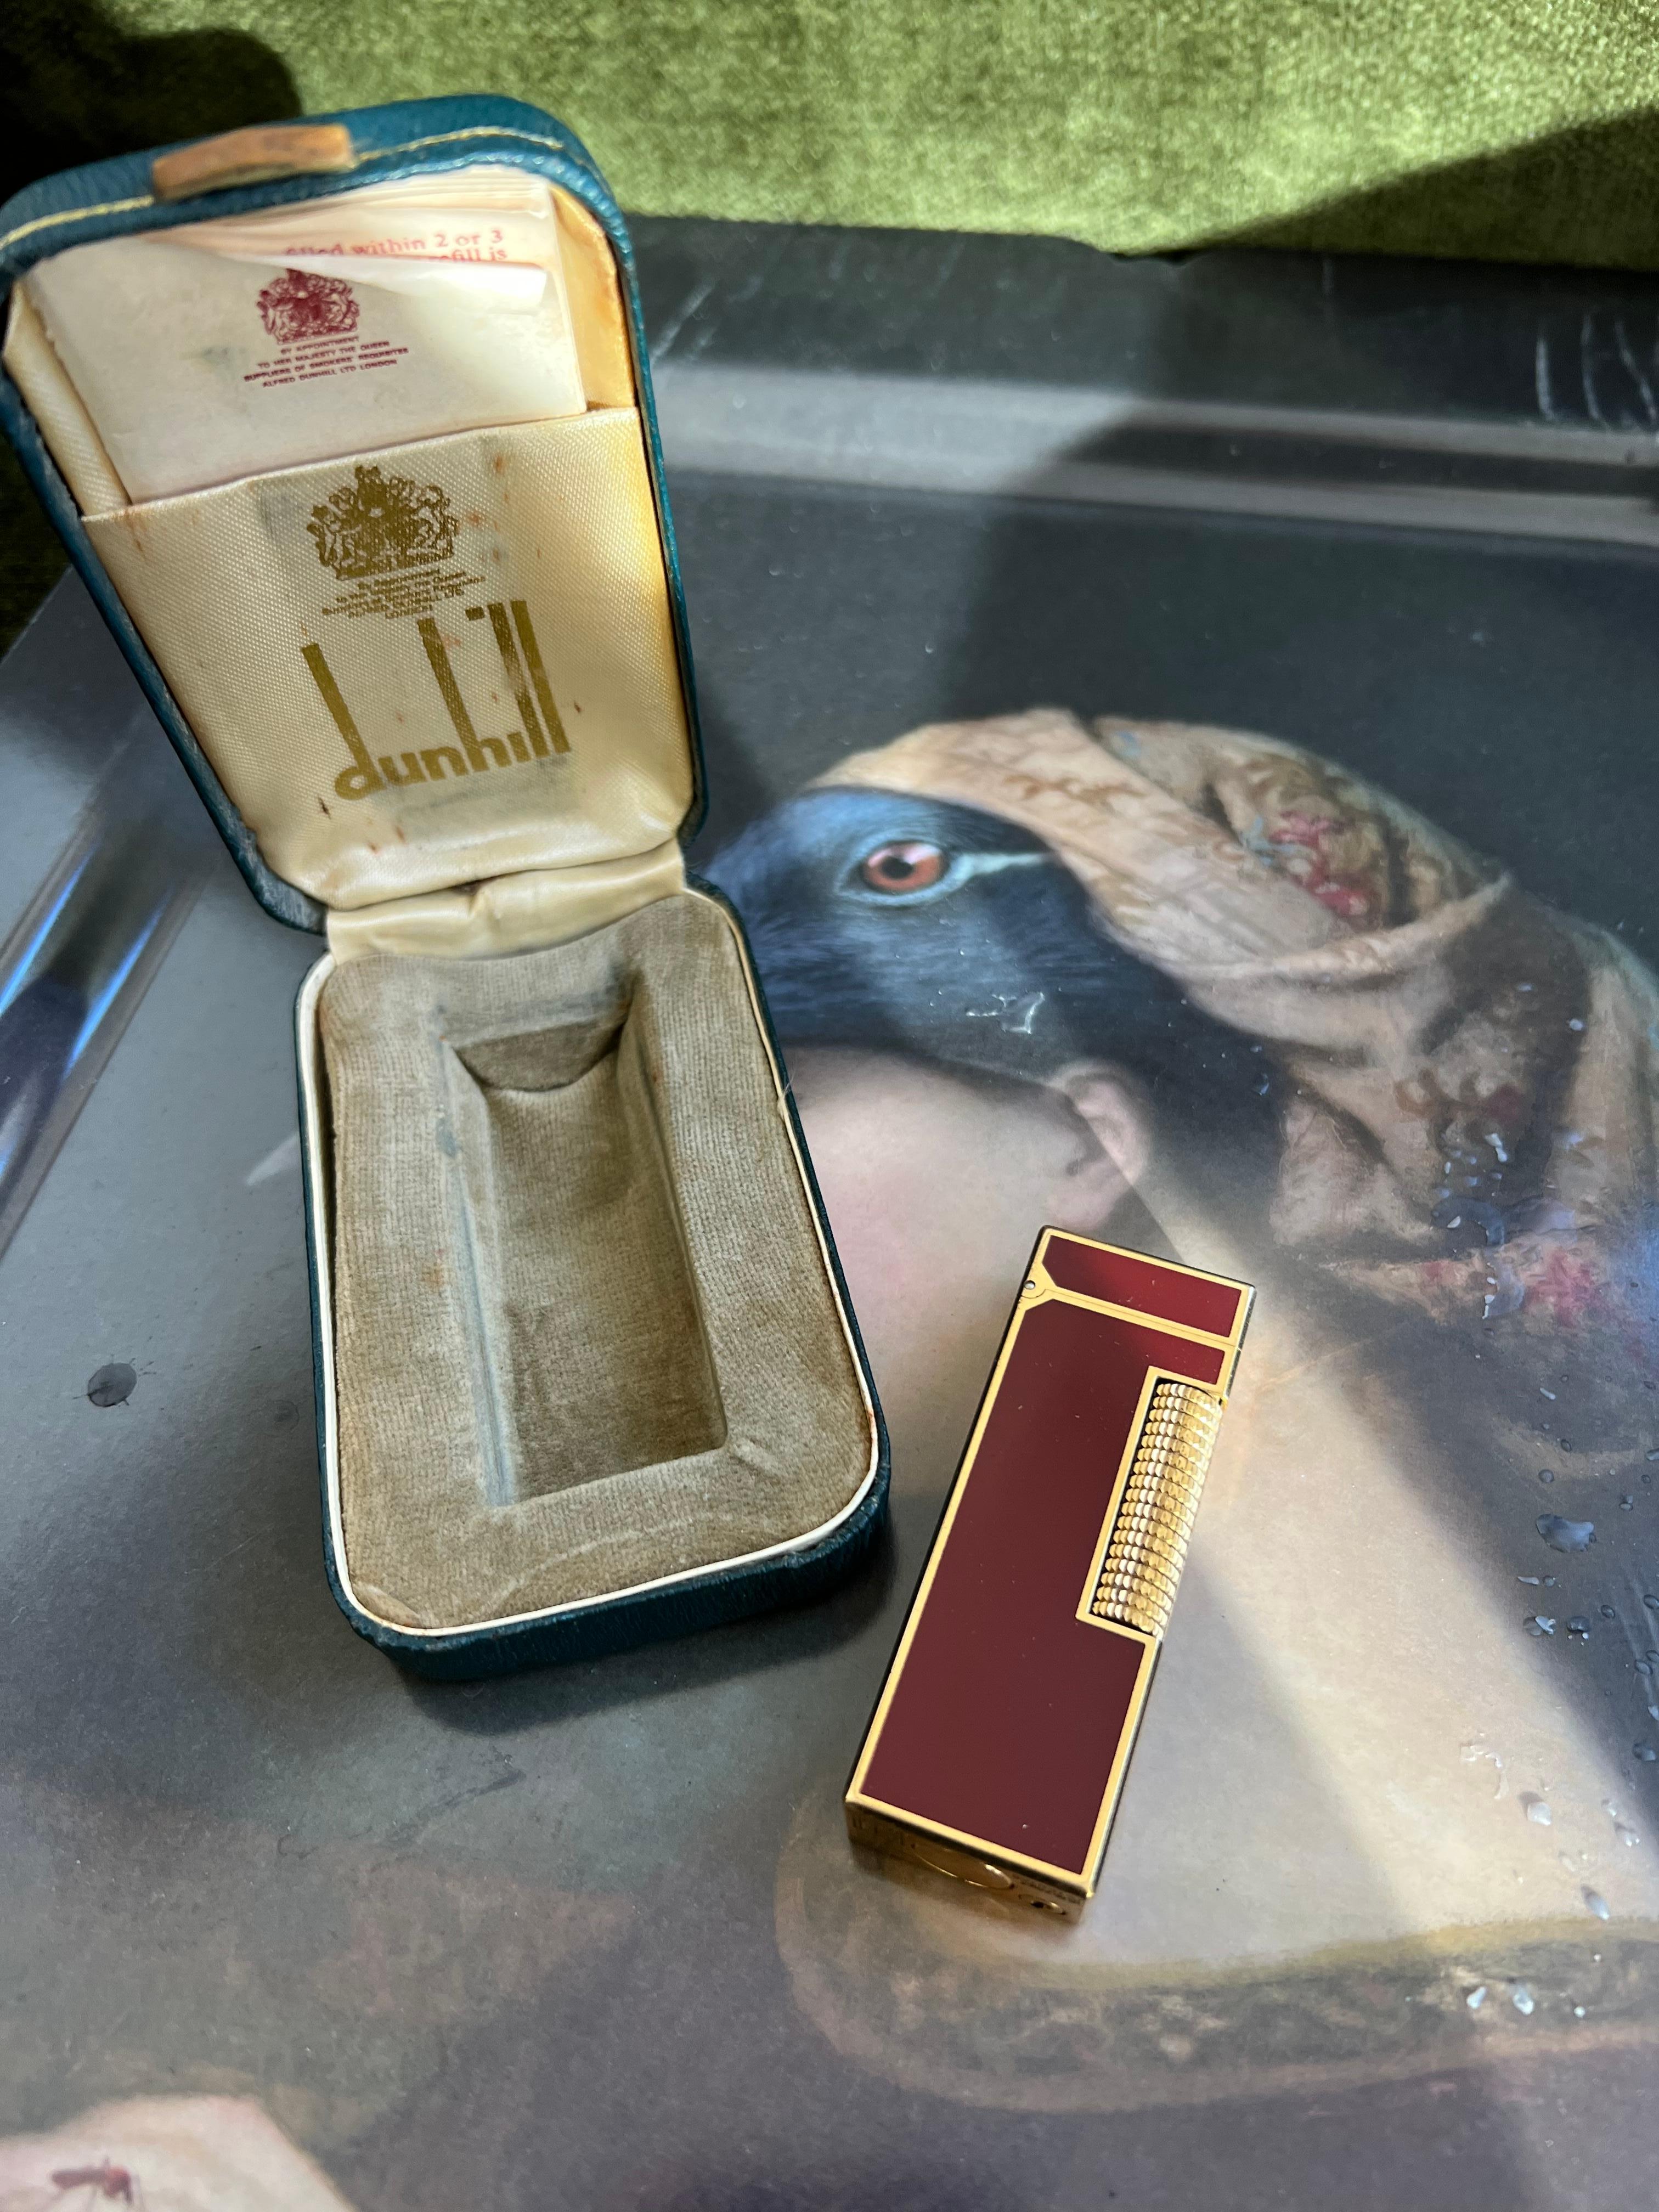 Circa 80s Iconic Rare Vintage Dunhill Gold-Plated & Red Lacquer Swiss, Lighter For Sale 3